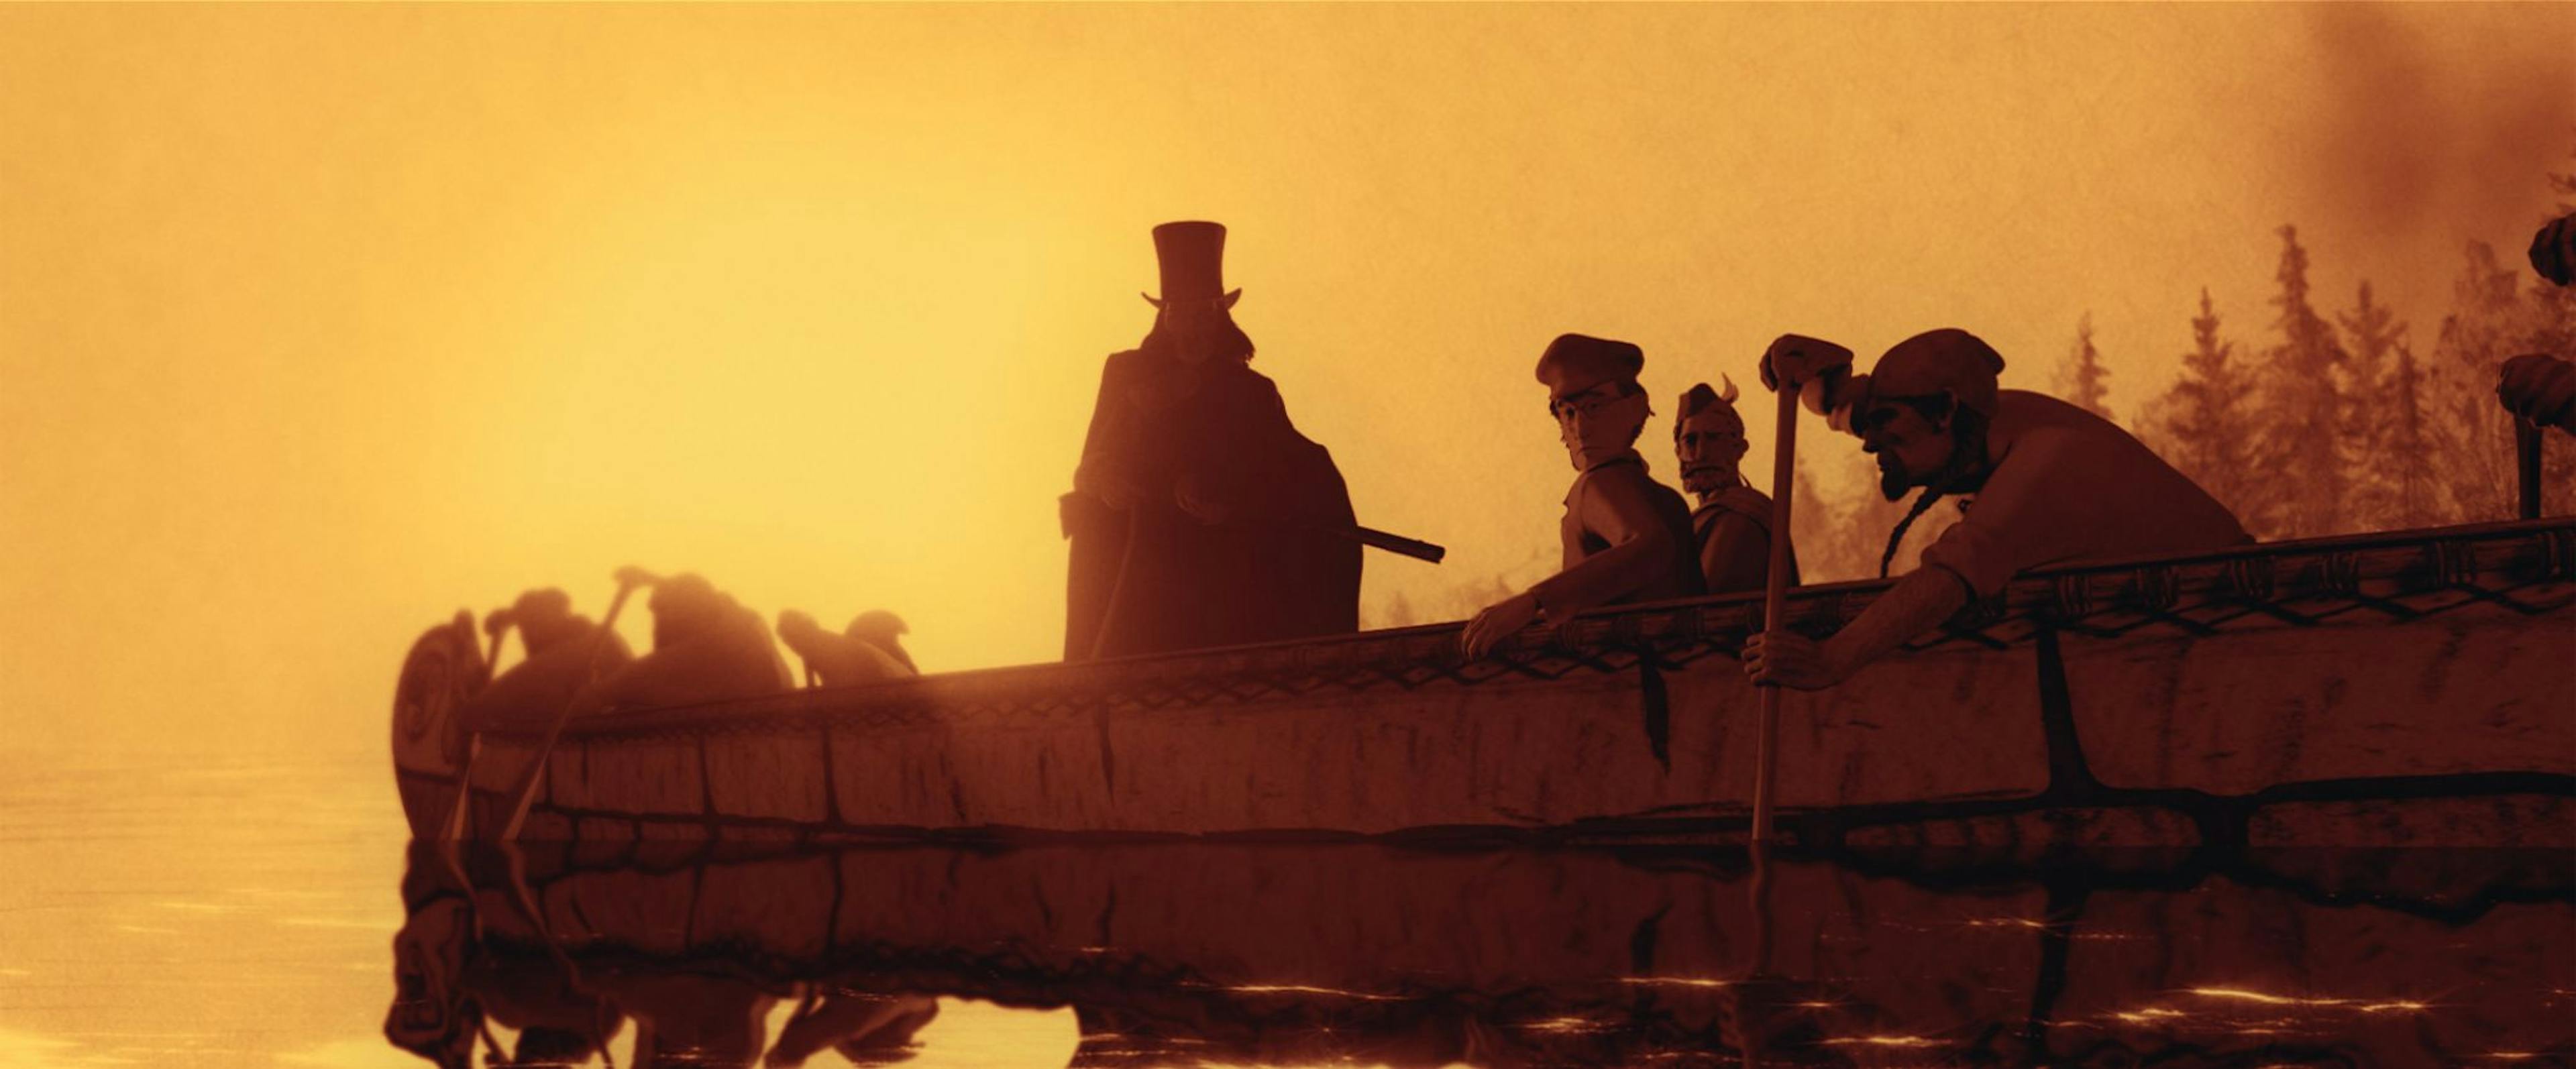 A sepia-toned image of a group of men on a canoe in a river. One man is wearing a top hat and is standing up in the canoe, brandishing a shotgun